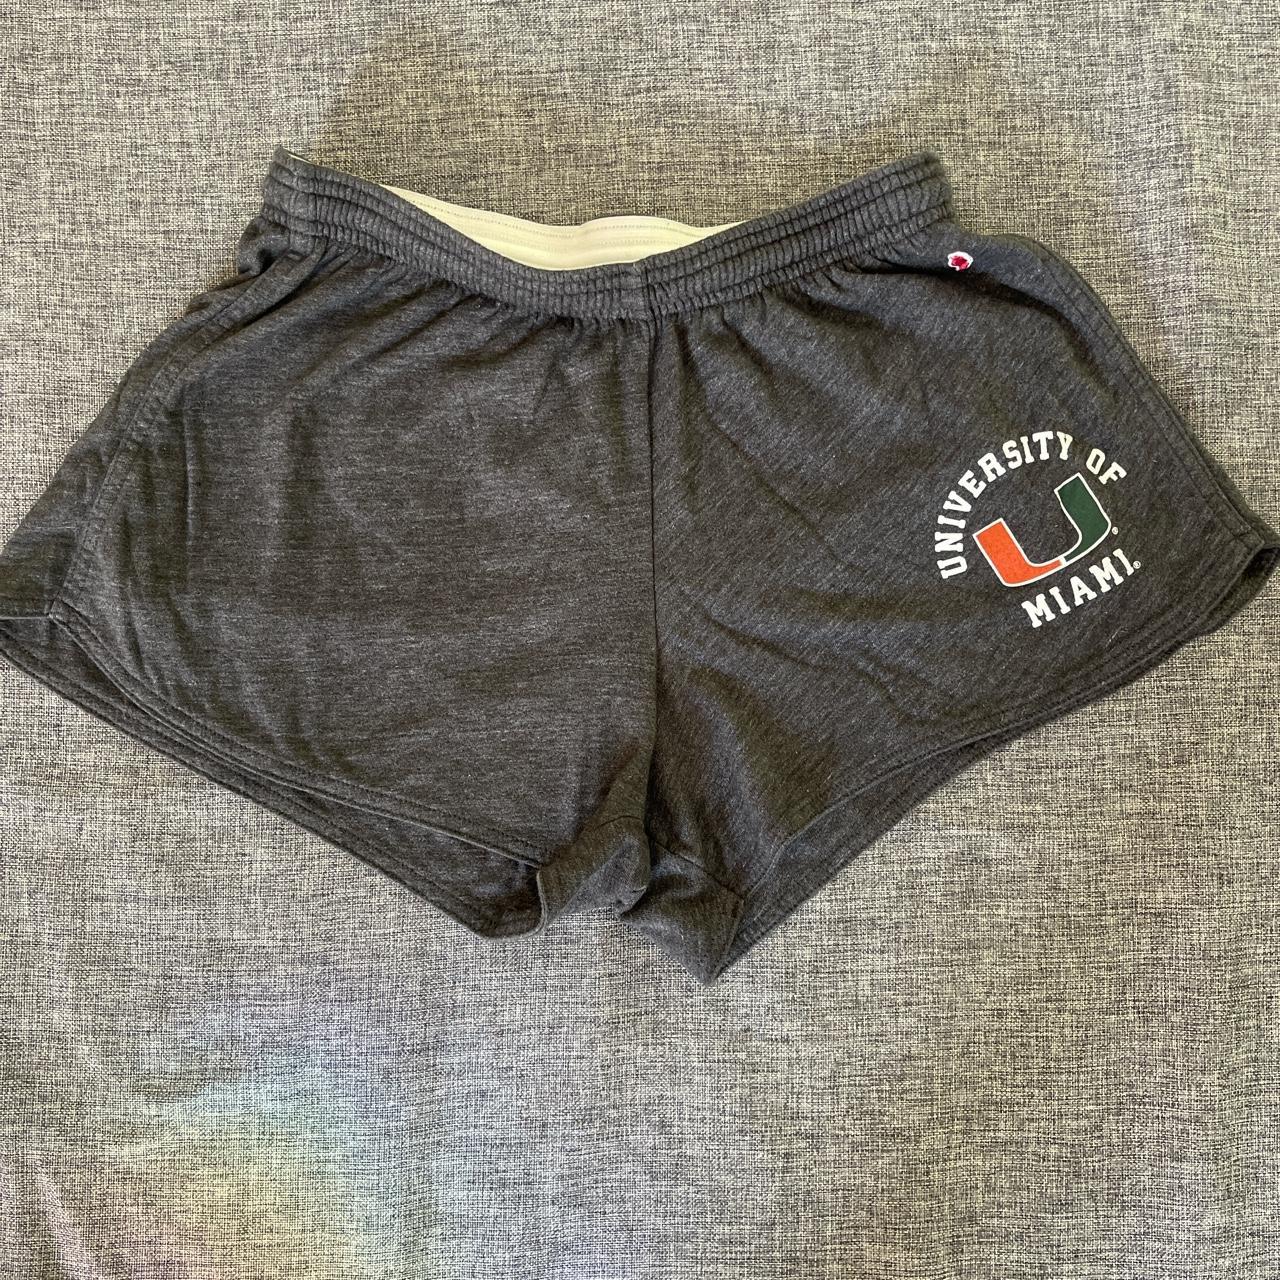 University of Miami sweat shorts. Purchased at the...